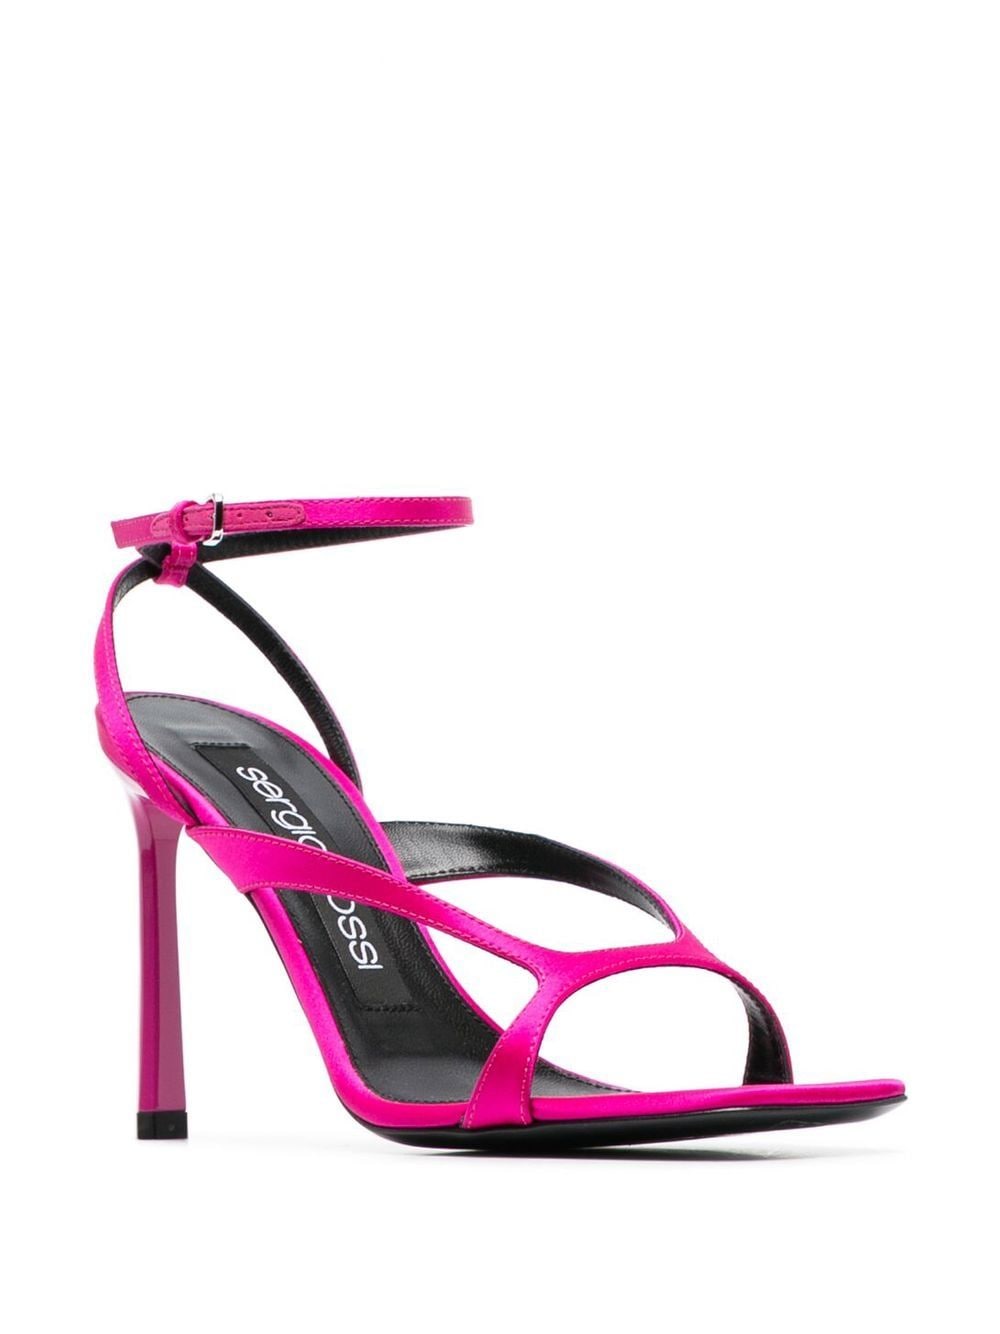 SERGIO ROSSI PINK LEATHER SANDAL